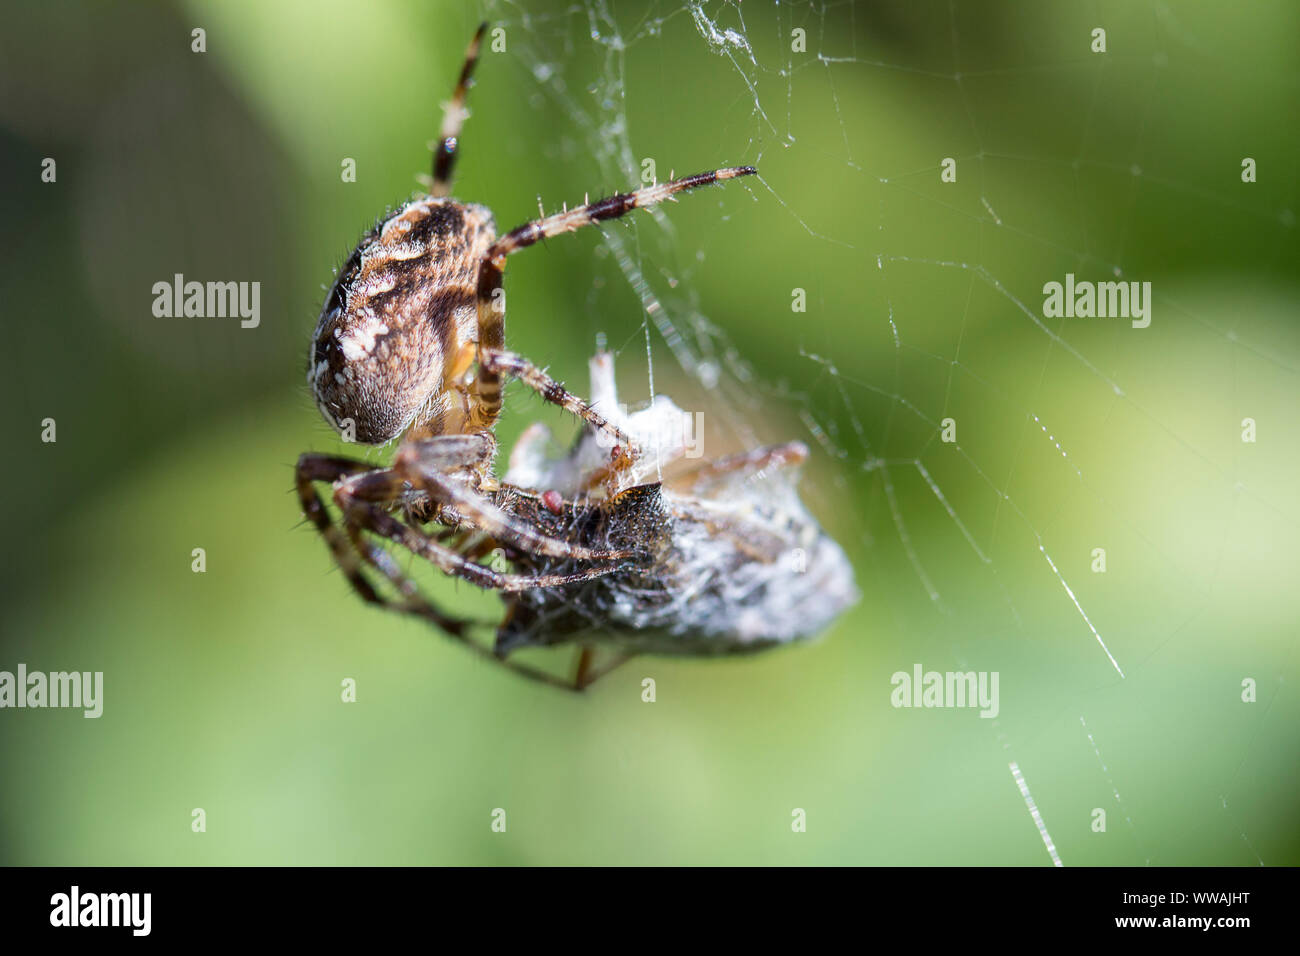 Garden spider (Araneus diadematus) large light brown with light and dark markings and a white cross on large abdomen eight striped legs seen with prey Stock Photo